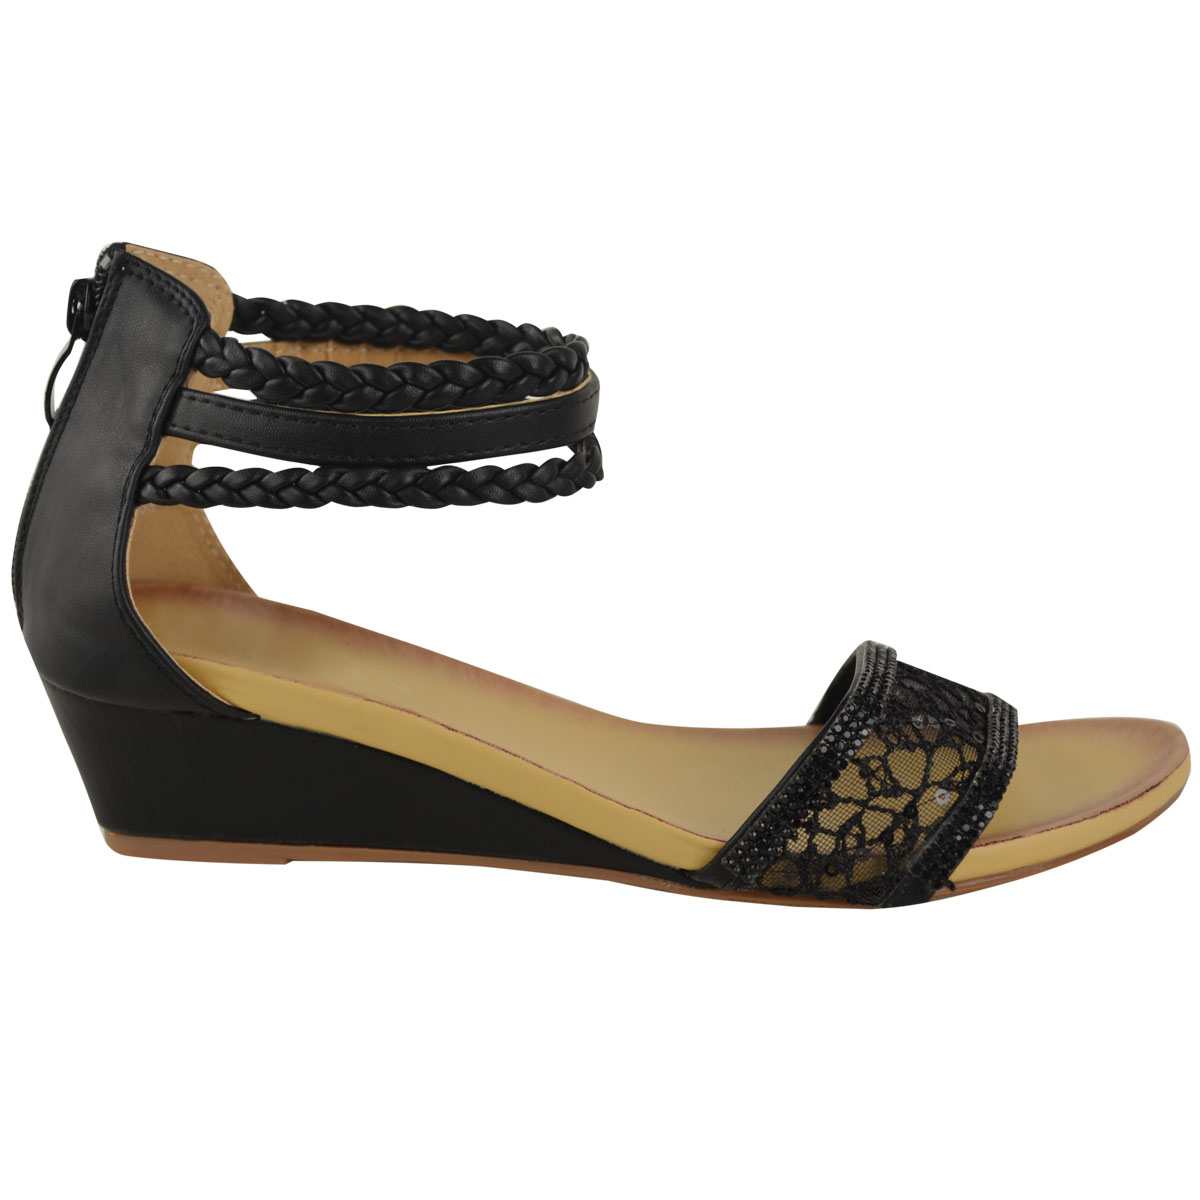 ... WOMENS-LOW-HEEL-WEDGE-SUMMER-SANDALS-ANKLE-STRAPPY-DIAMANTE-SHOES-SIZE